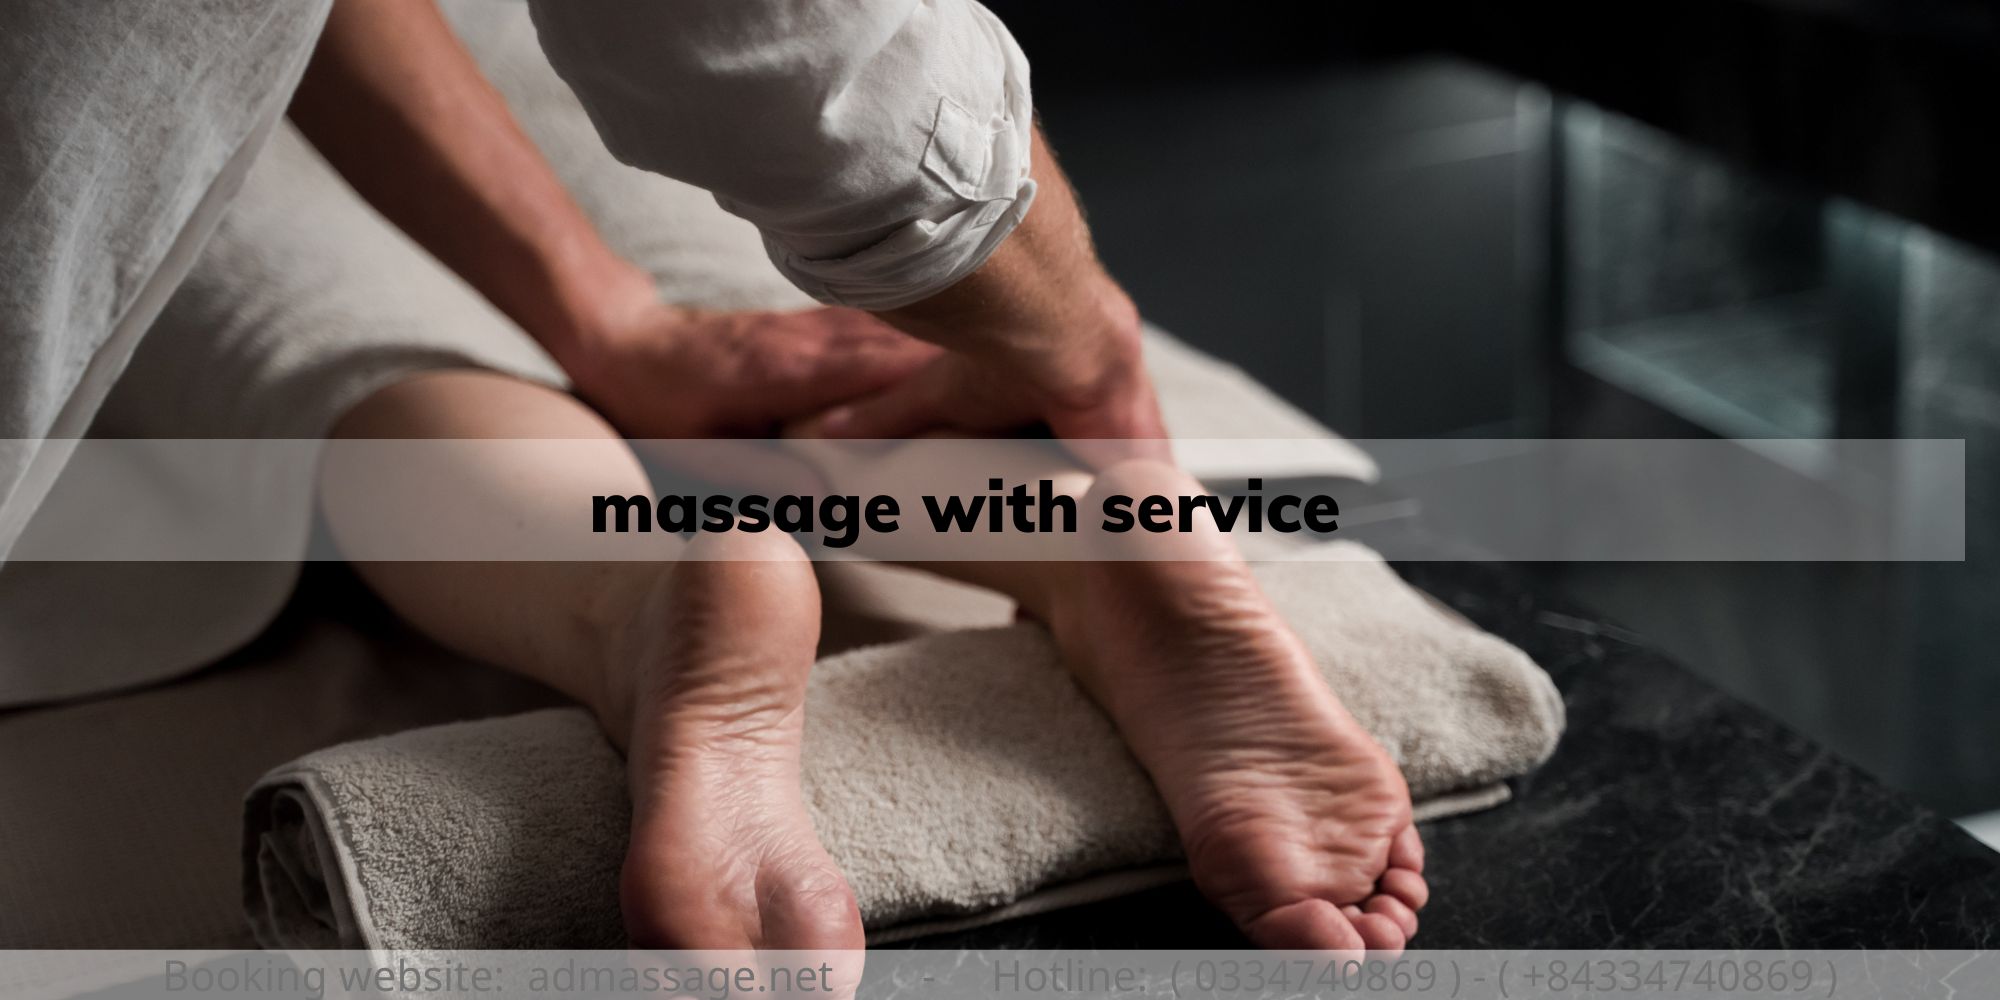 massage with service